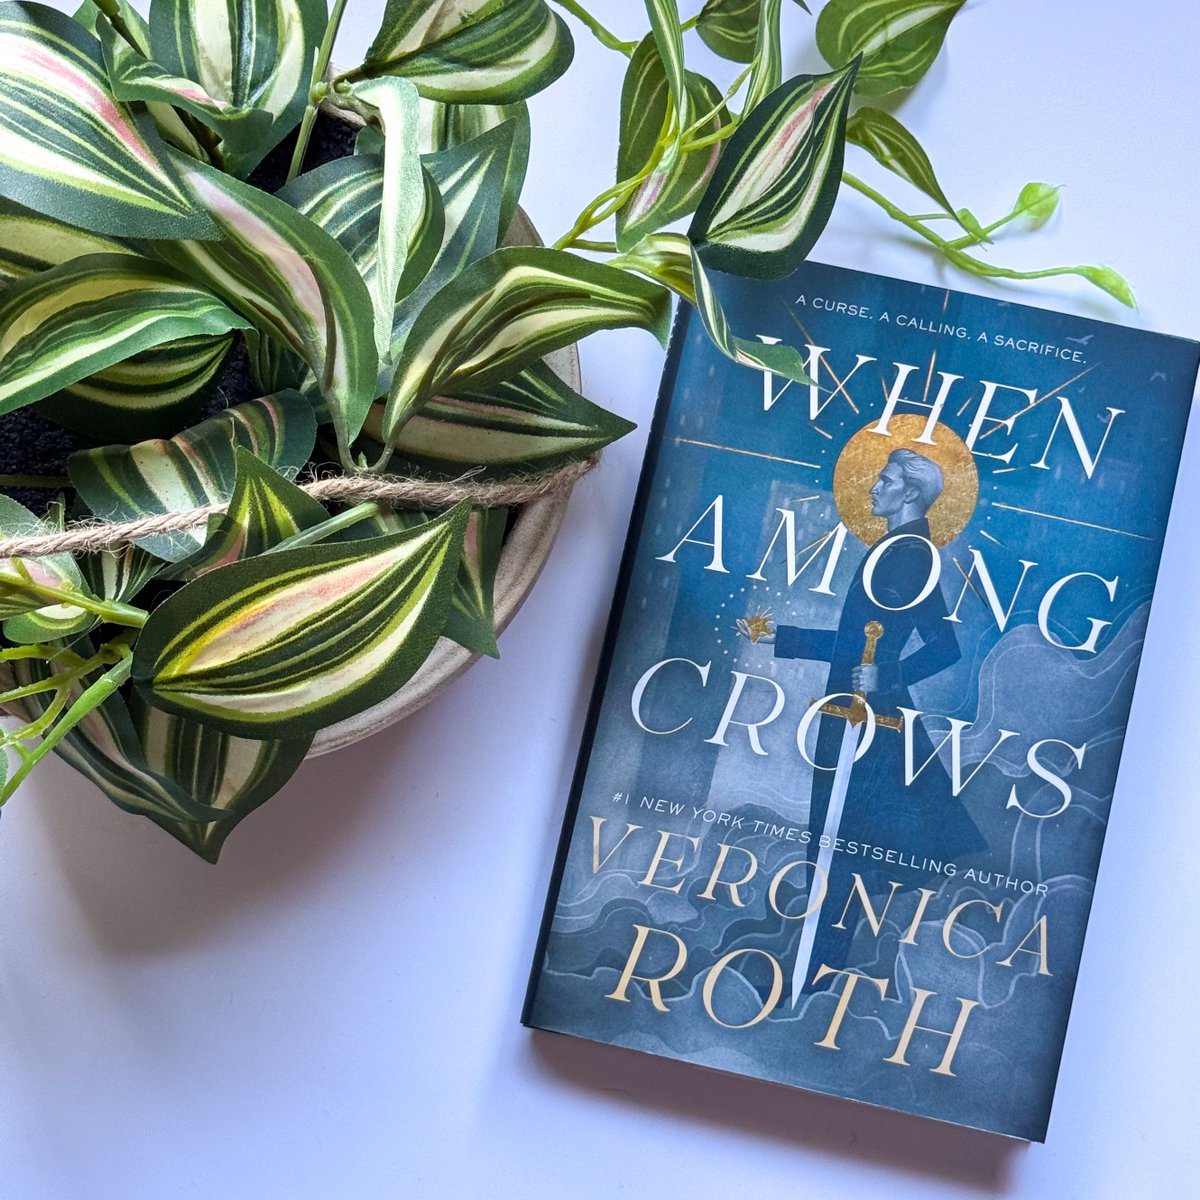 Who's ready for a #sweepstakes?! Today, we're giving YOU the chance to win a finished copy of #WhenAmongCrows by Veronica Roth! 🔅 Follow, like, and repost to enter! Good luck! ⁣⁣⁣ #WhenAmongCrowsSweeps